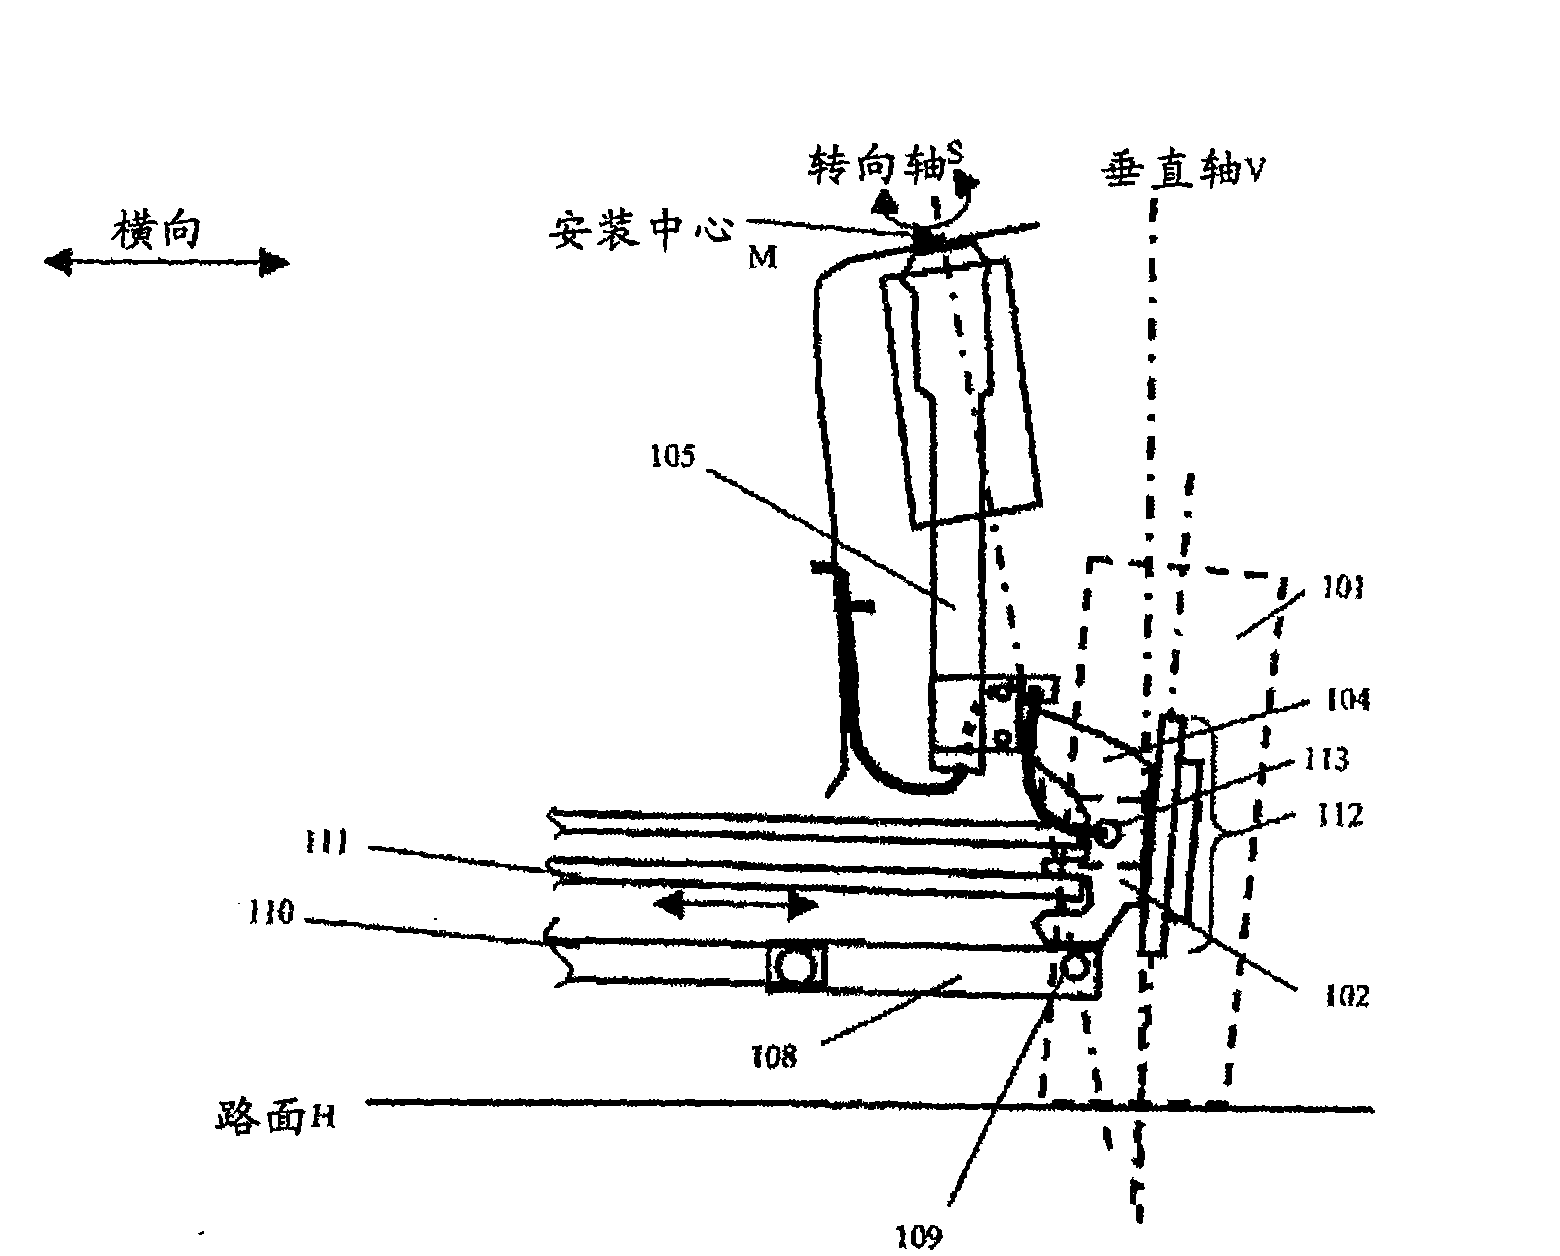 Motion control sensor system for a moving unit and motion control system